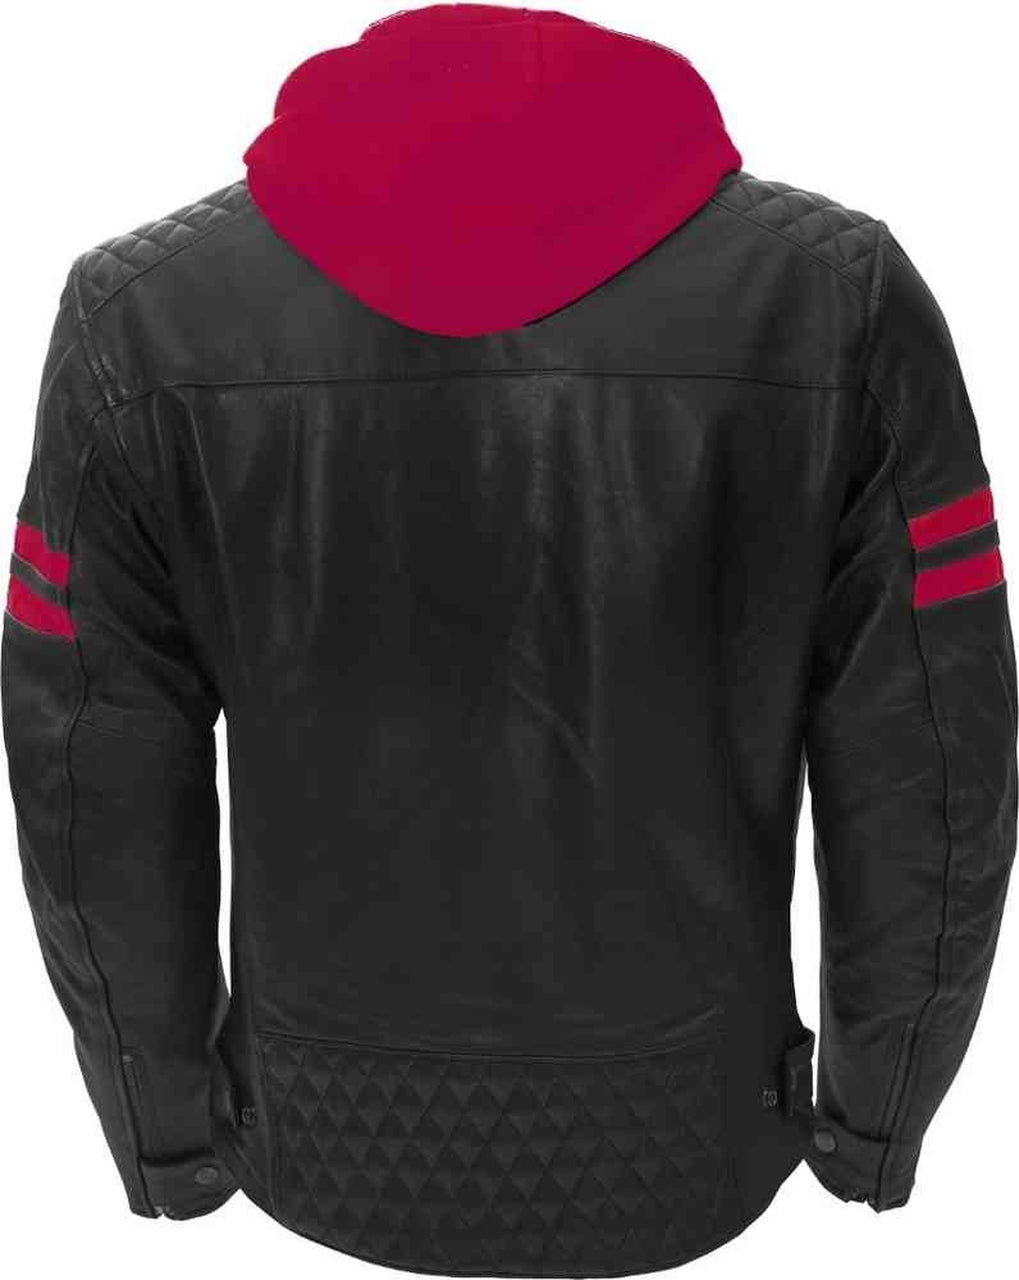 Mens Bomber Red Leather Jacket - The Genuine Leather